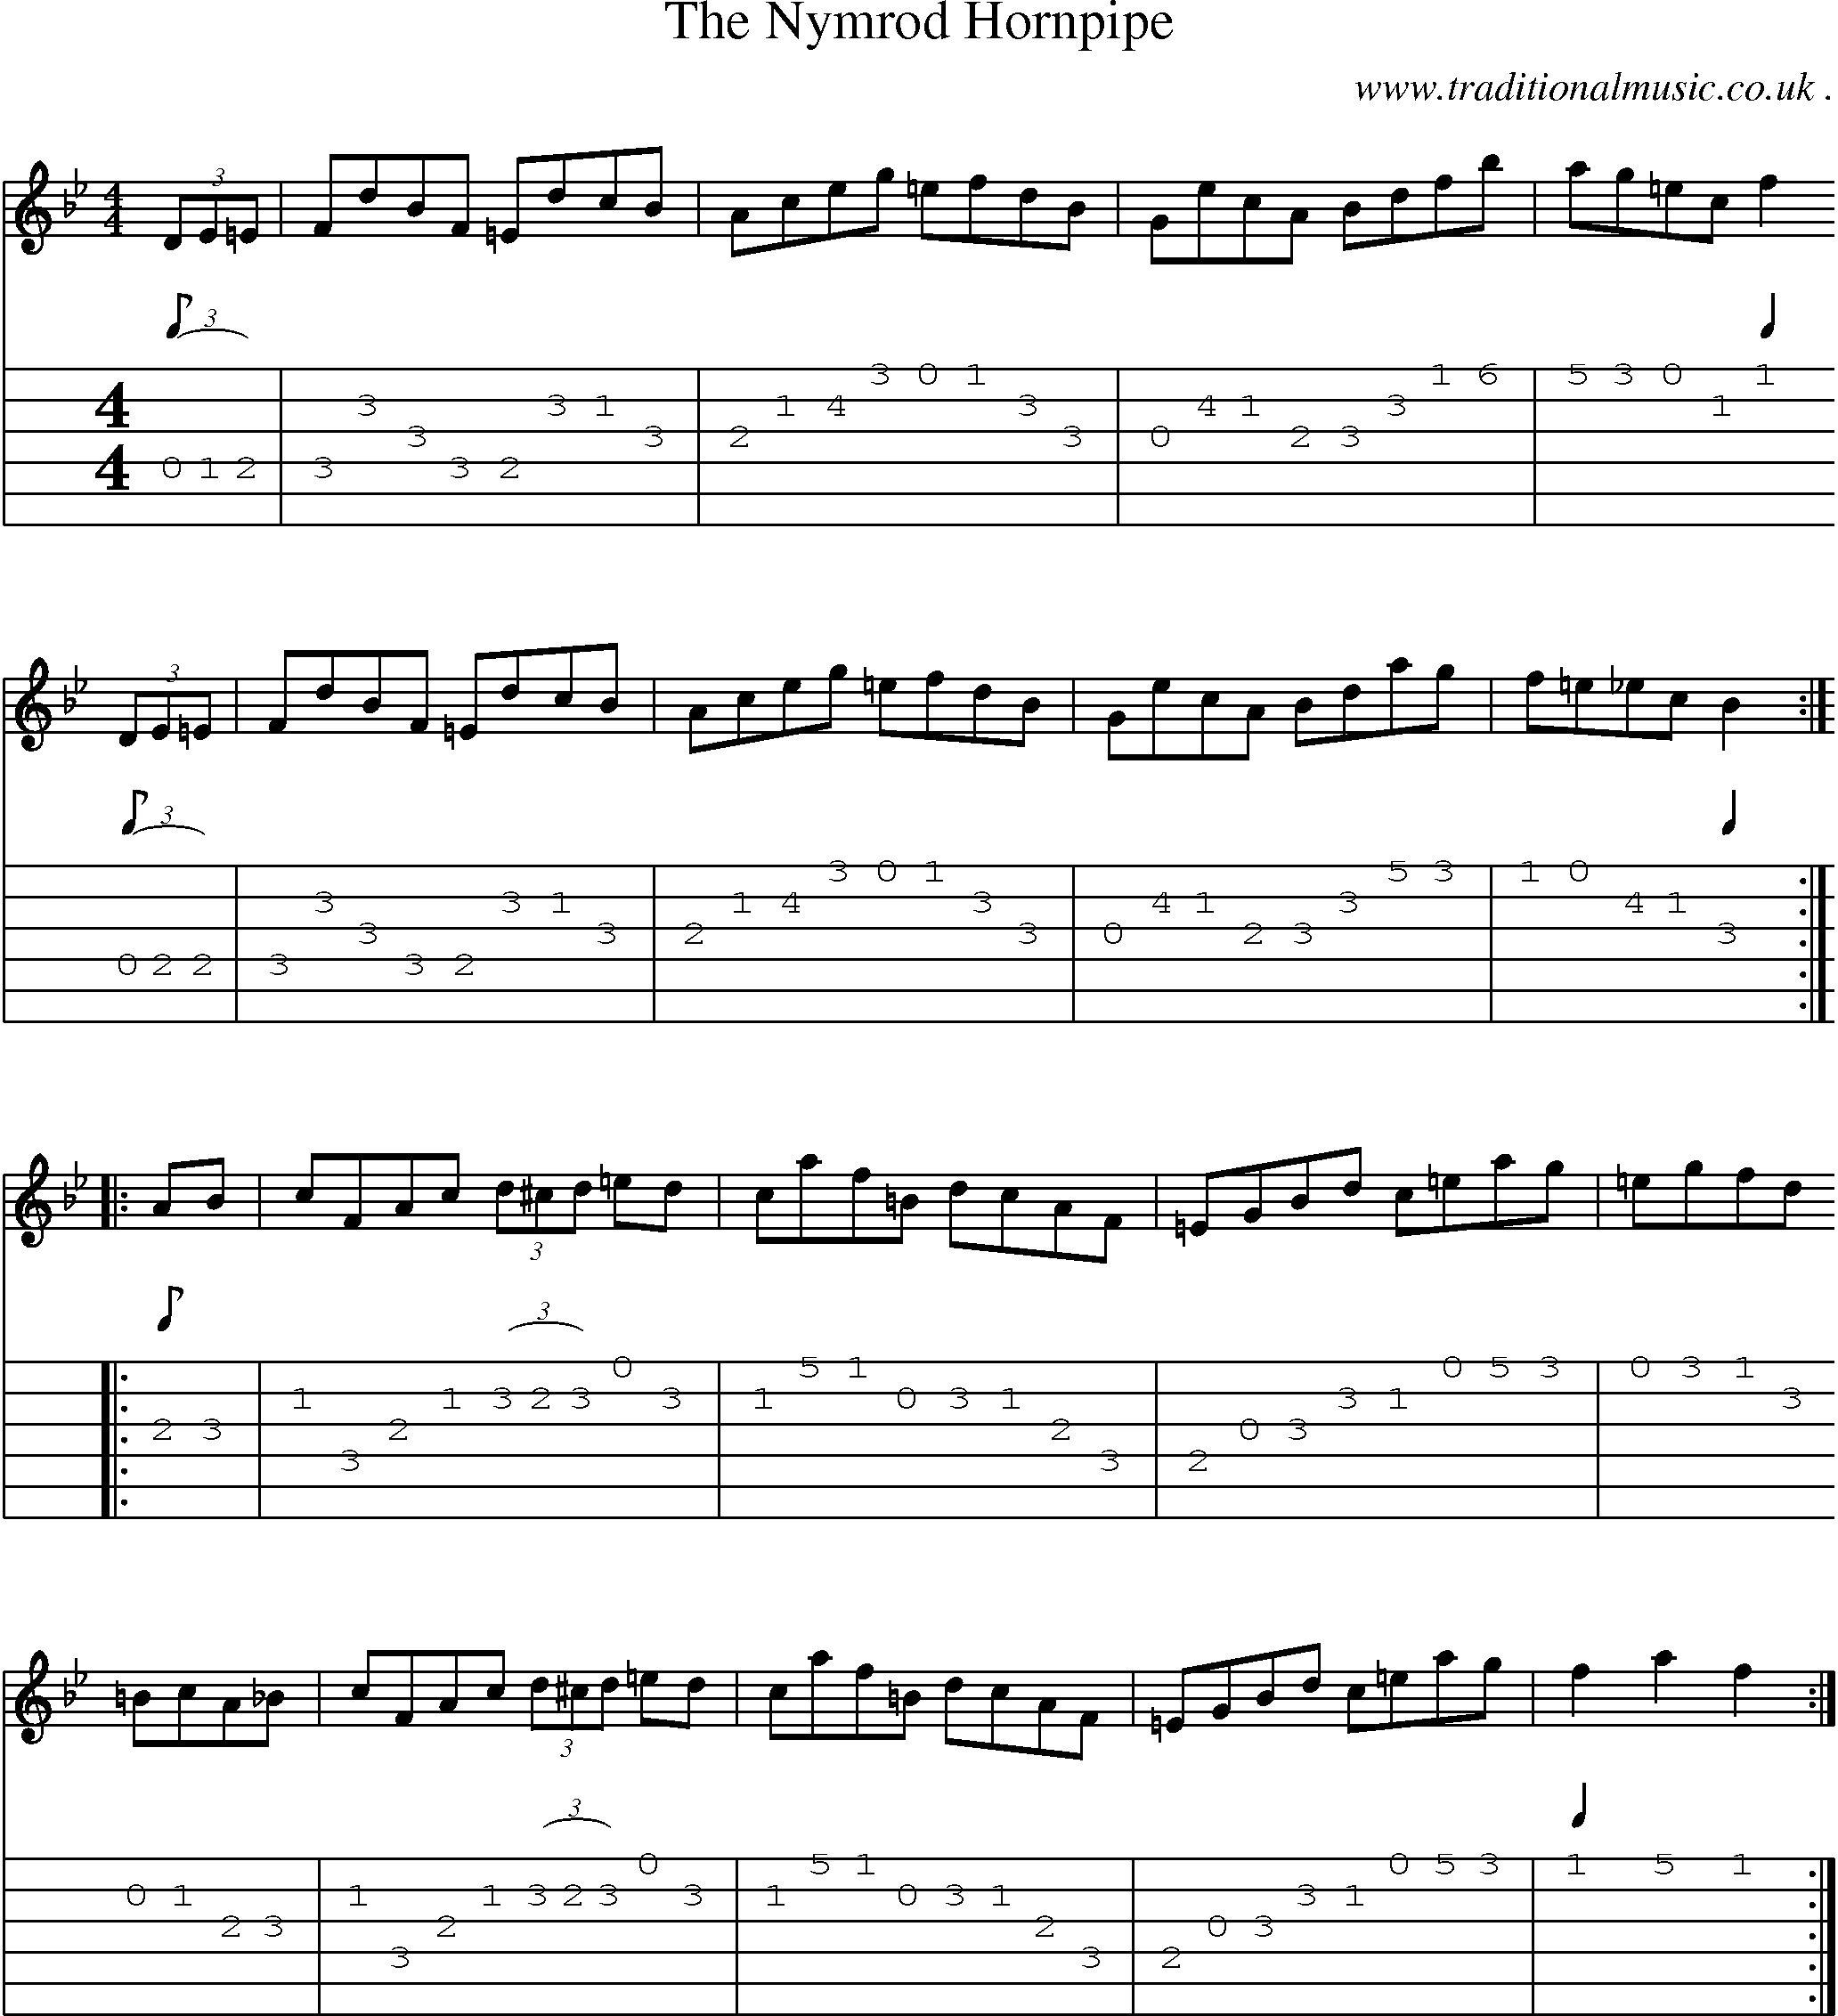 Sheet-Music and Guitar Tabs for The Nymrod Hornpipe